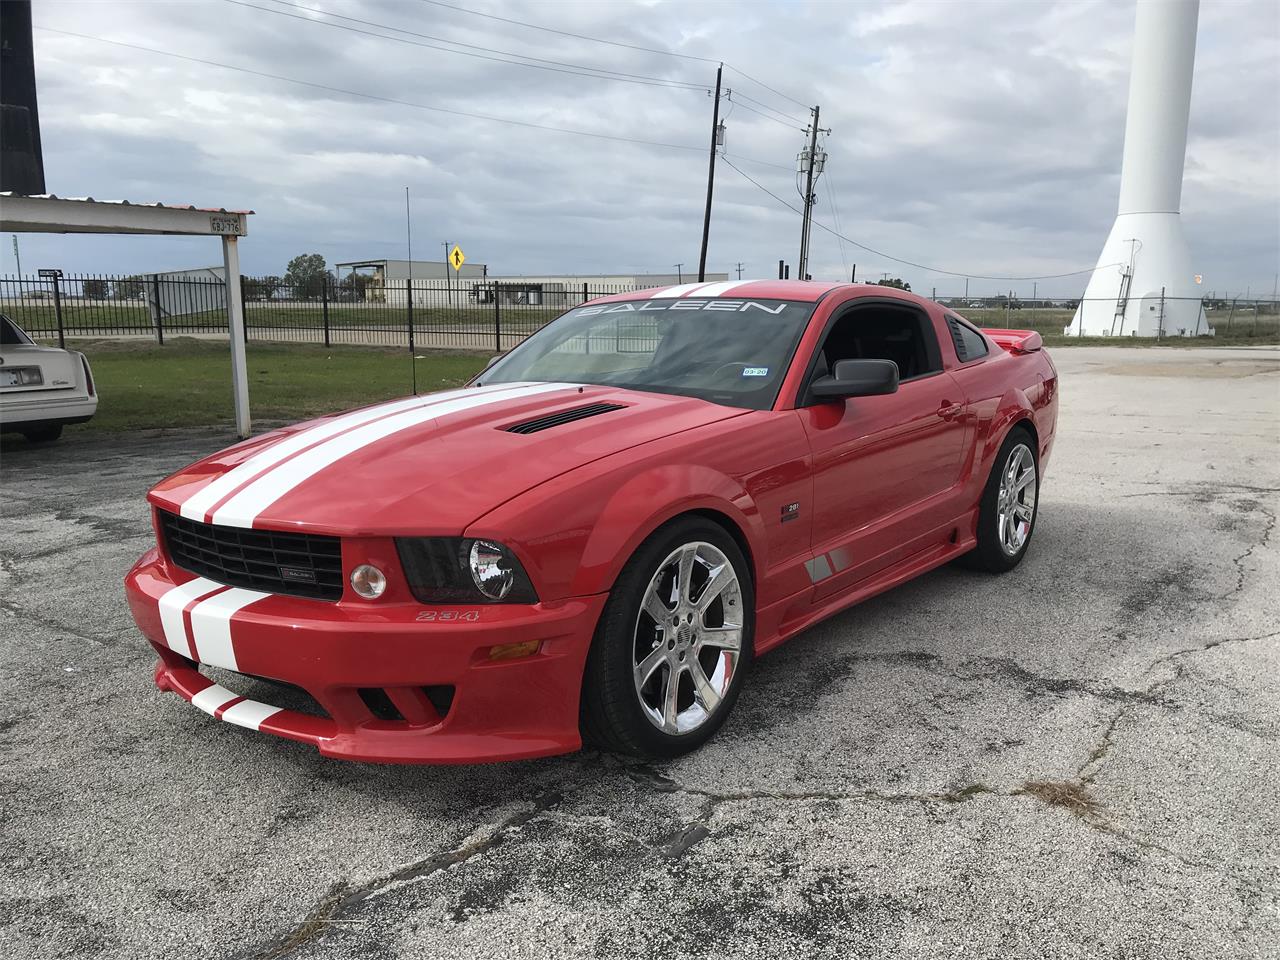 2006 Ford Mustang Saleen for Sale ClassicCars com CC 1299165